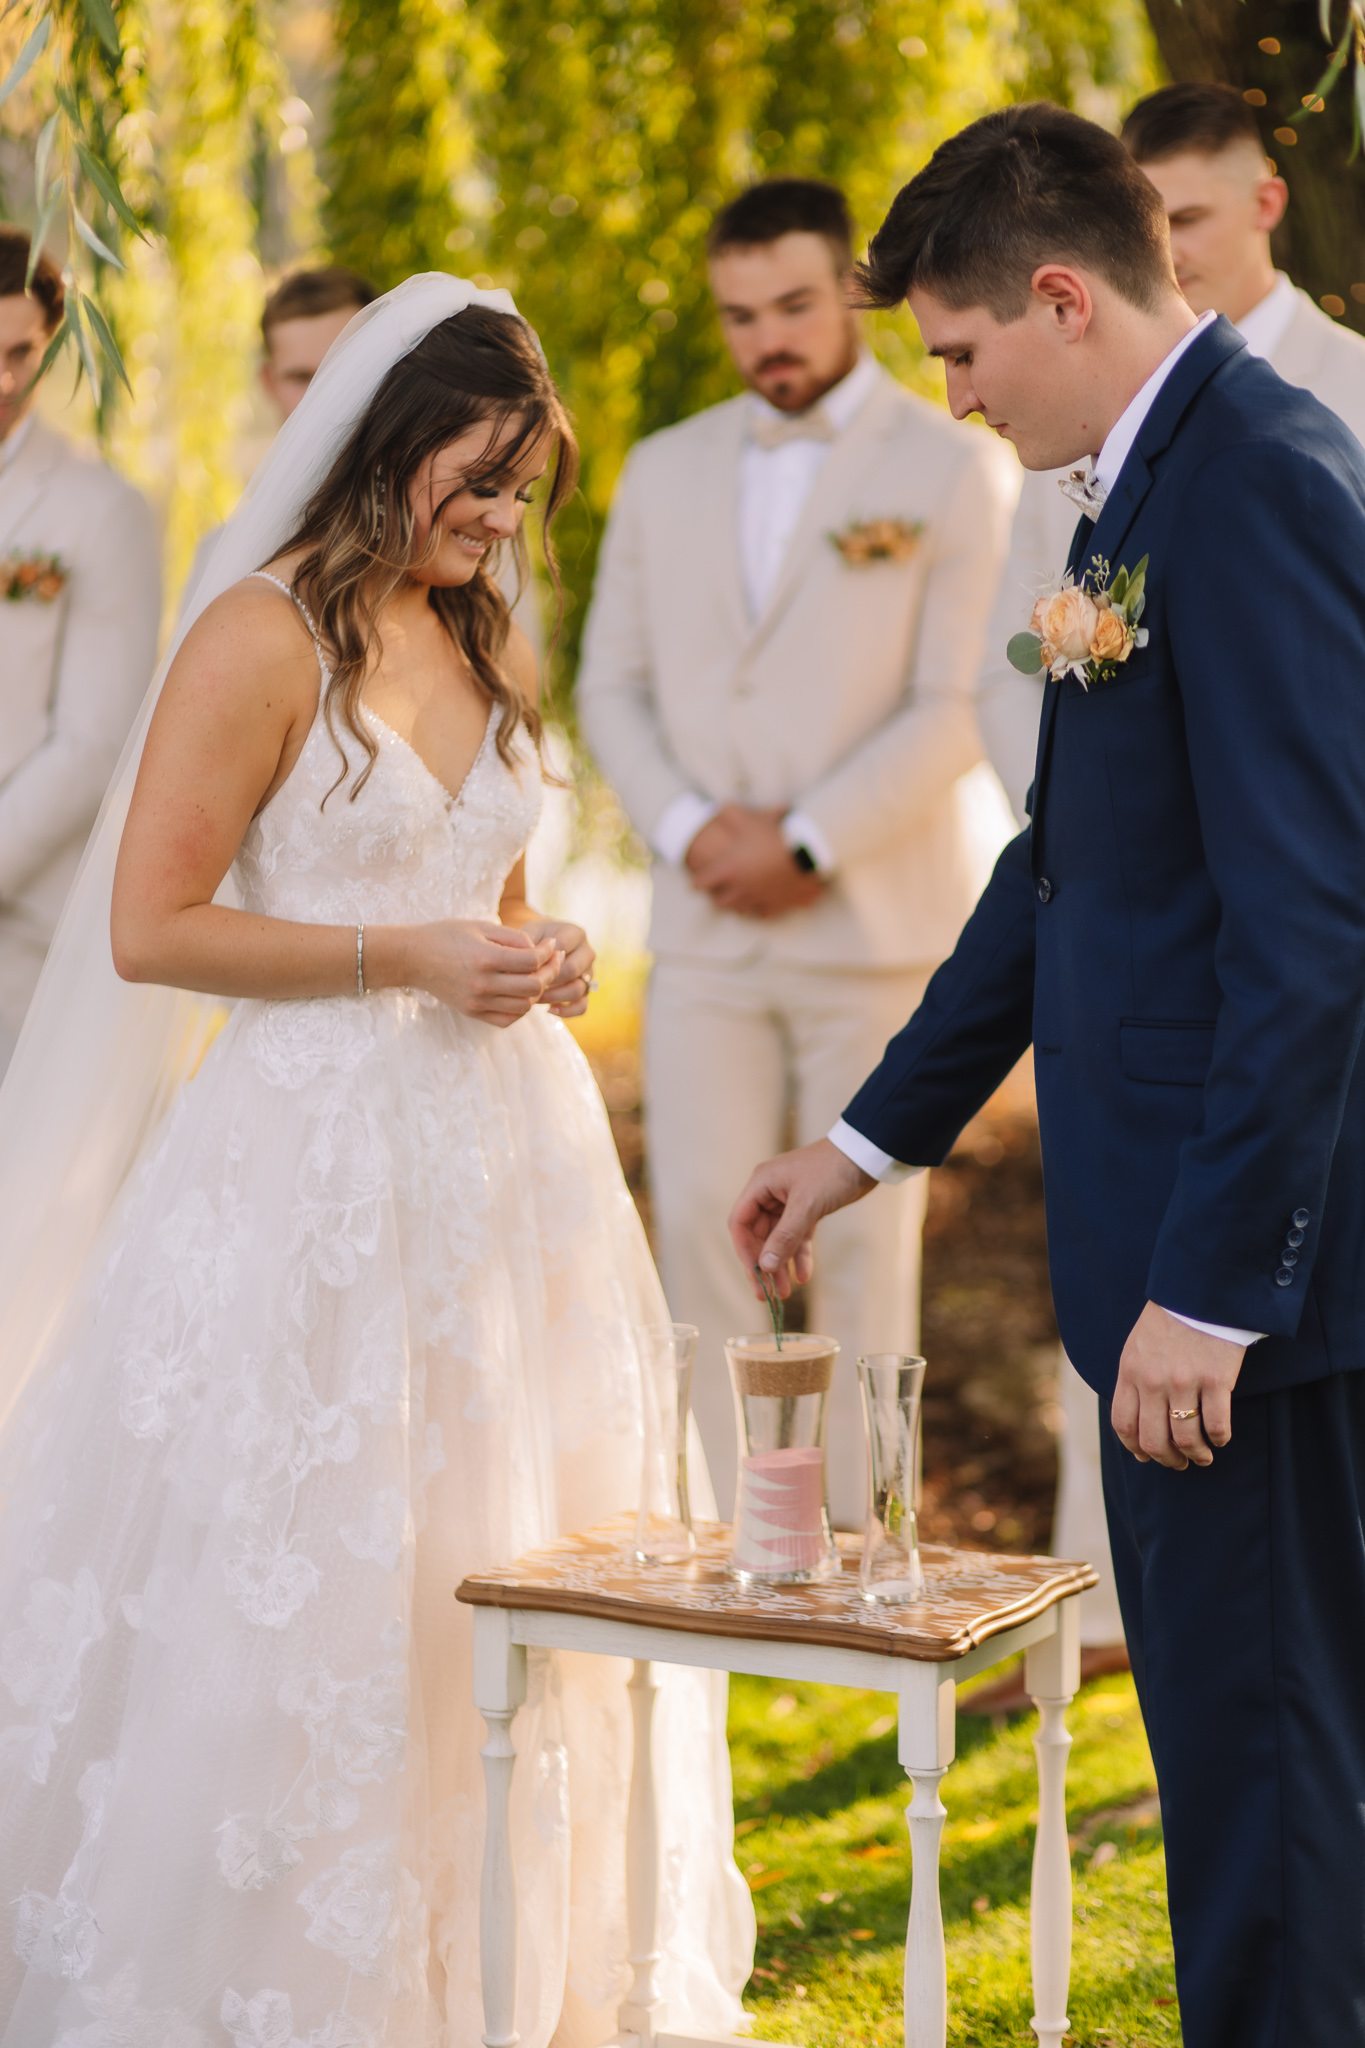 A bride and groom pouring colorful sand into a glass vase for their unity ceremony